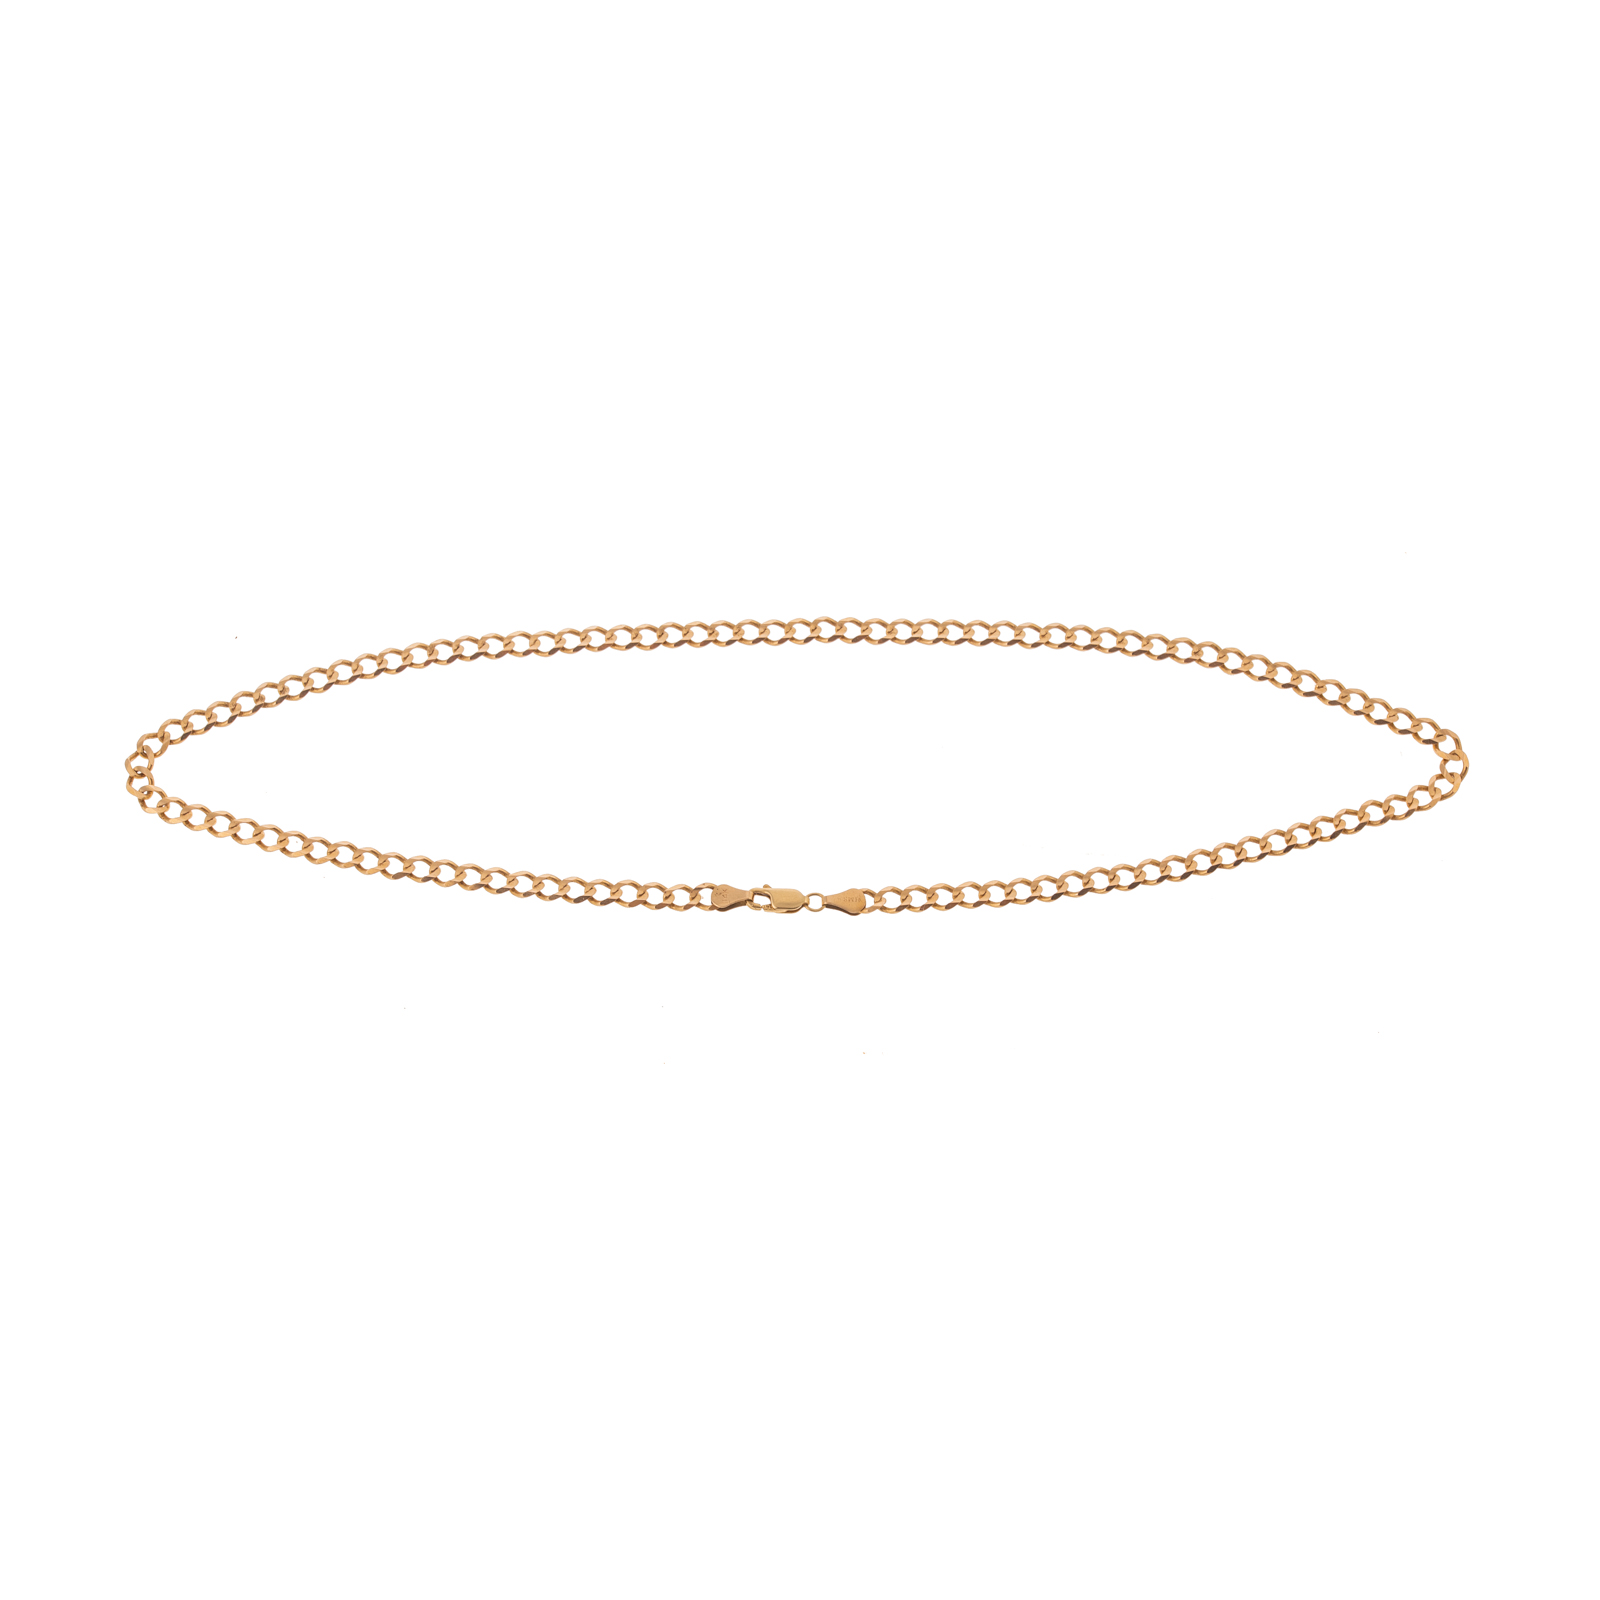 A CURB LINK CHAIN NECKLACE IN 14K